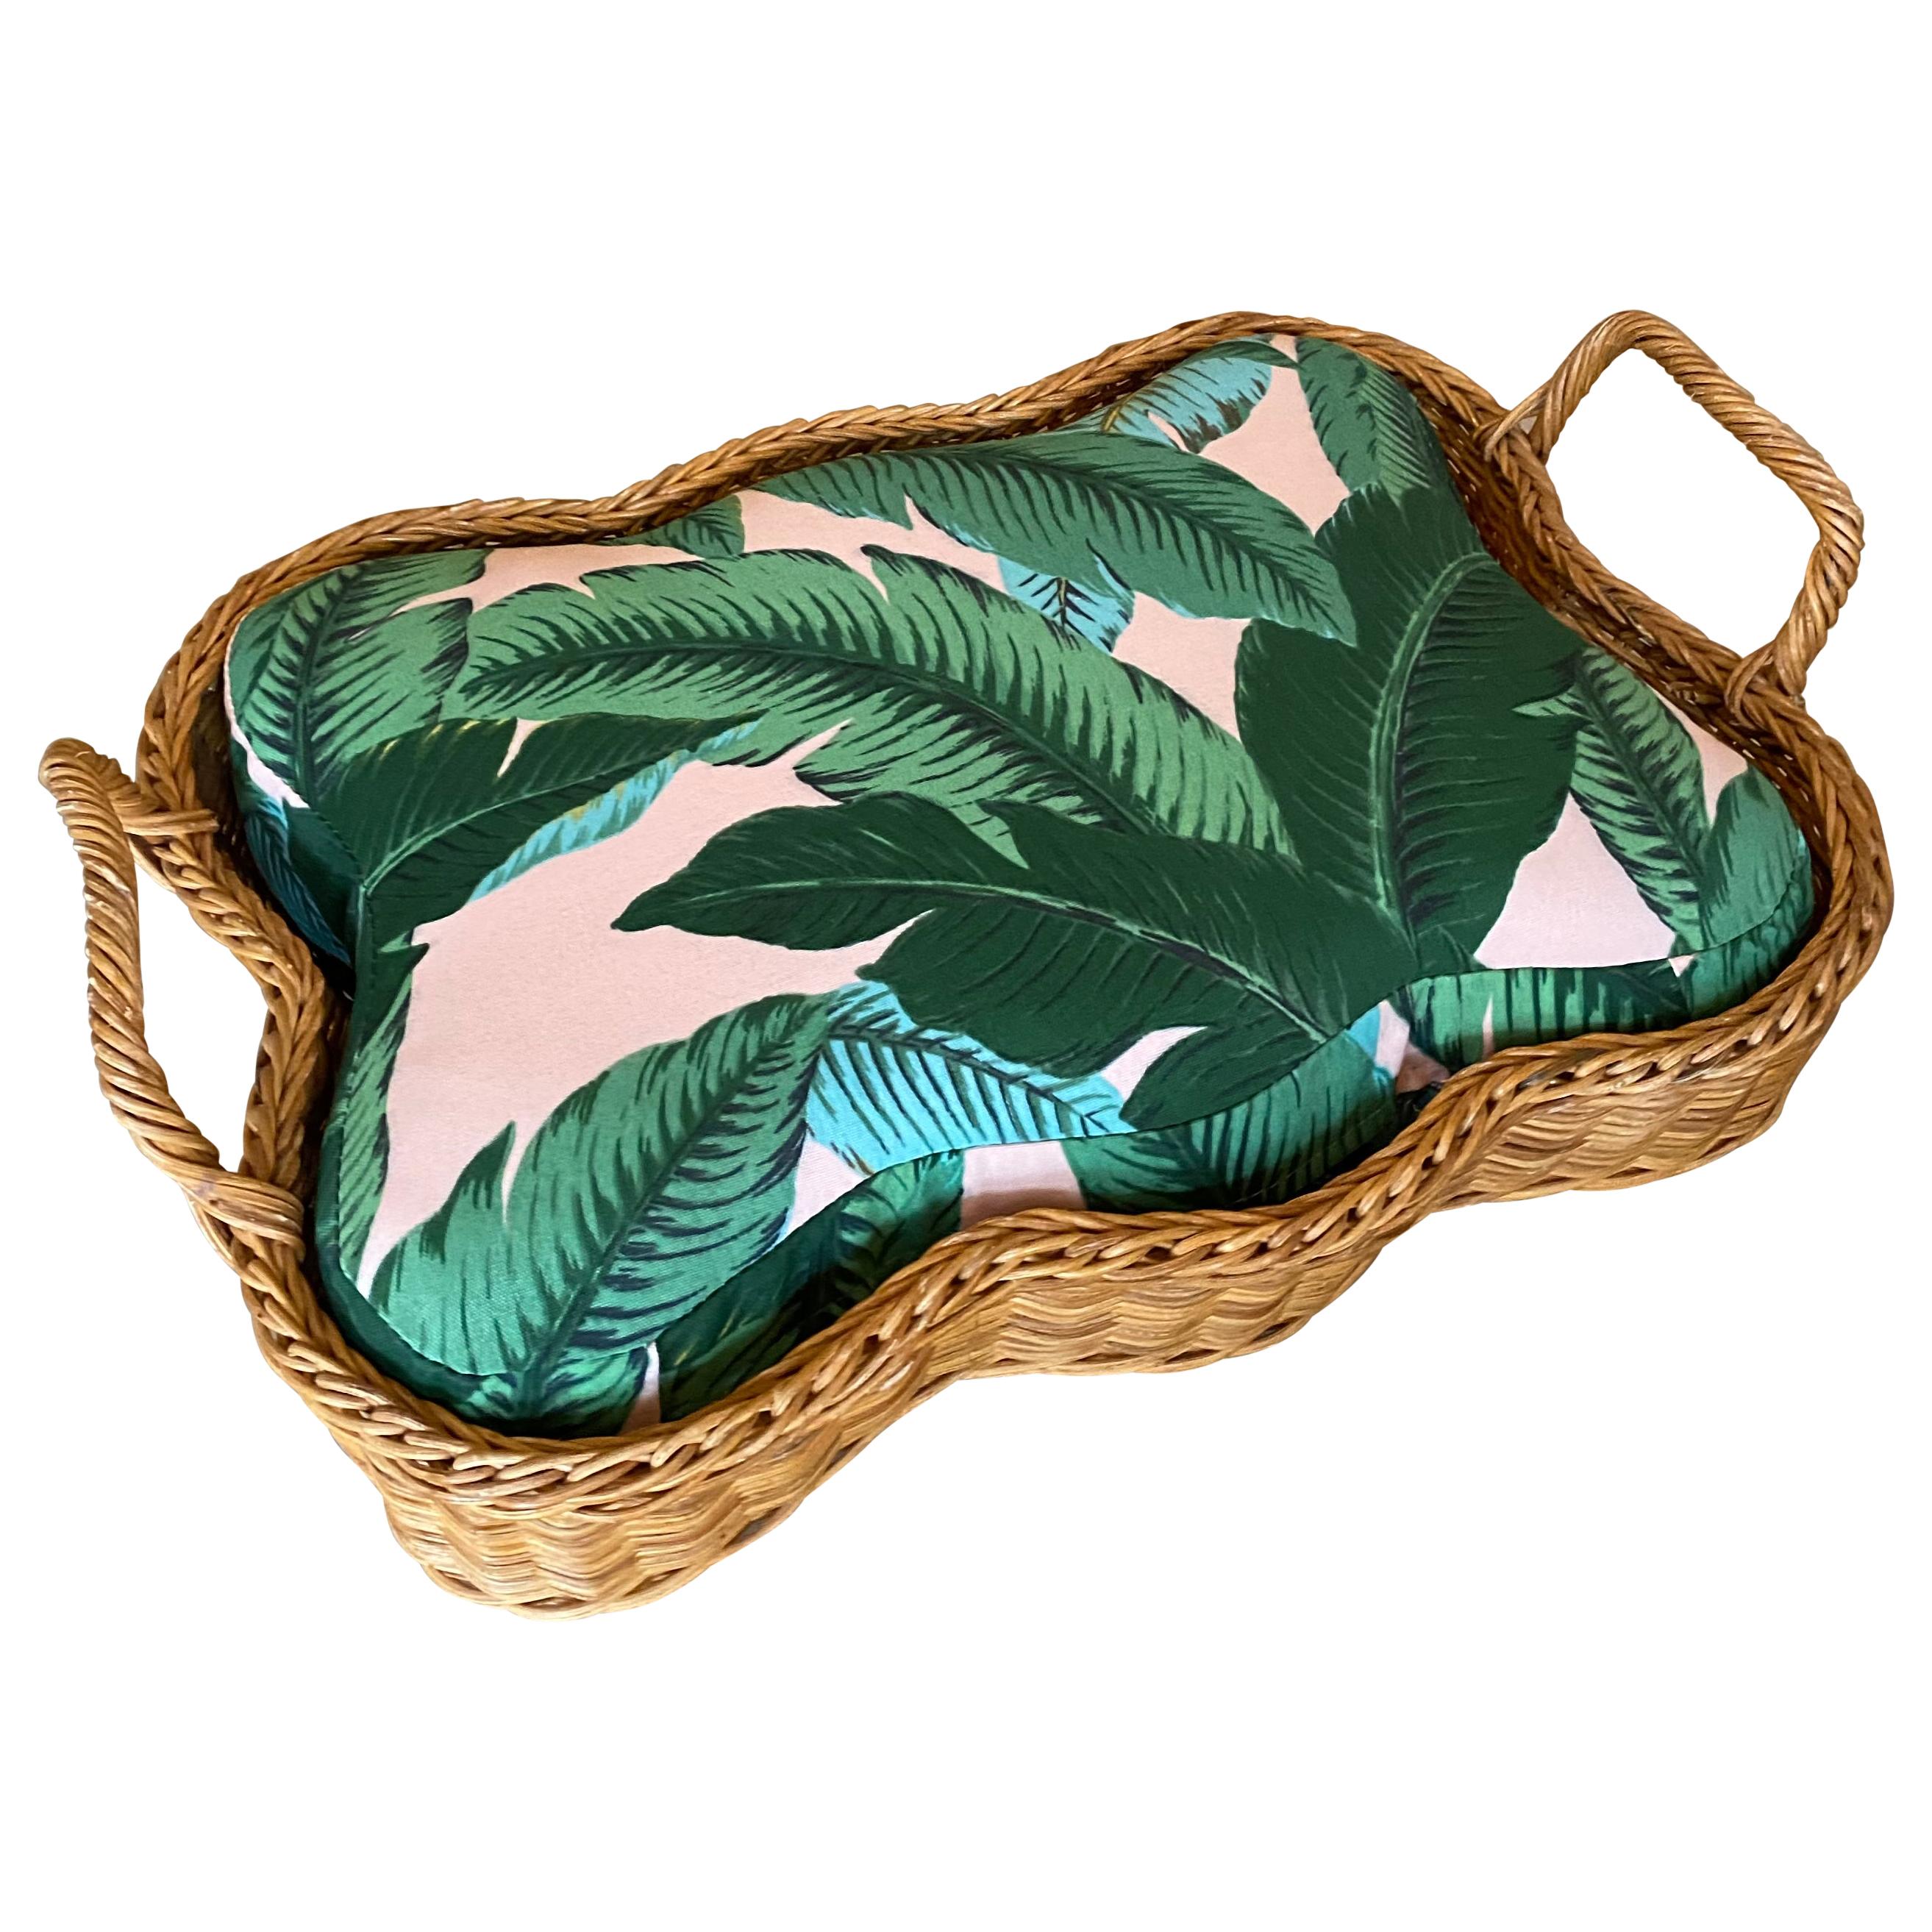 Vintage Wicker Dog Pet Bed Tropical Leaf Upholstery Small